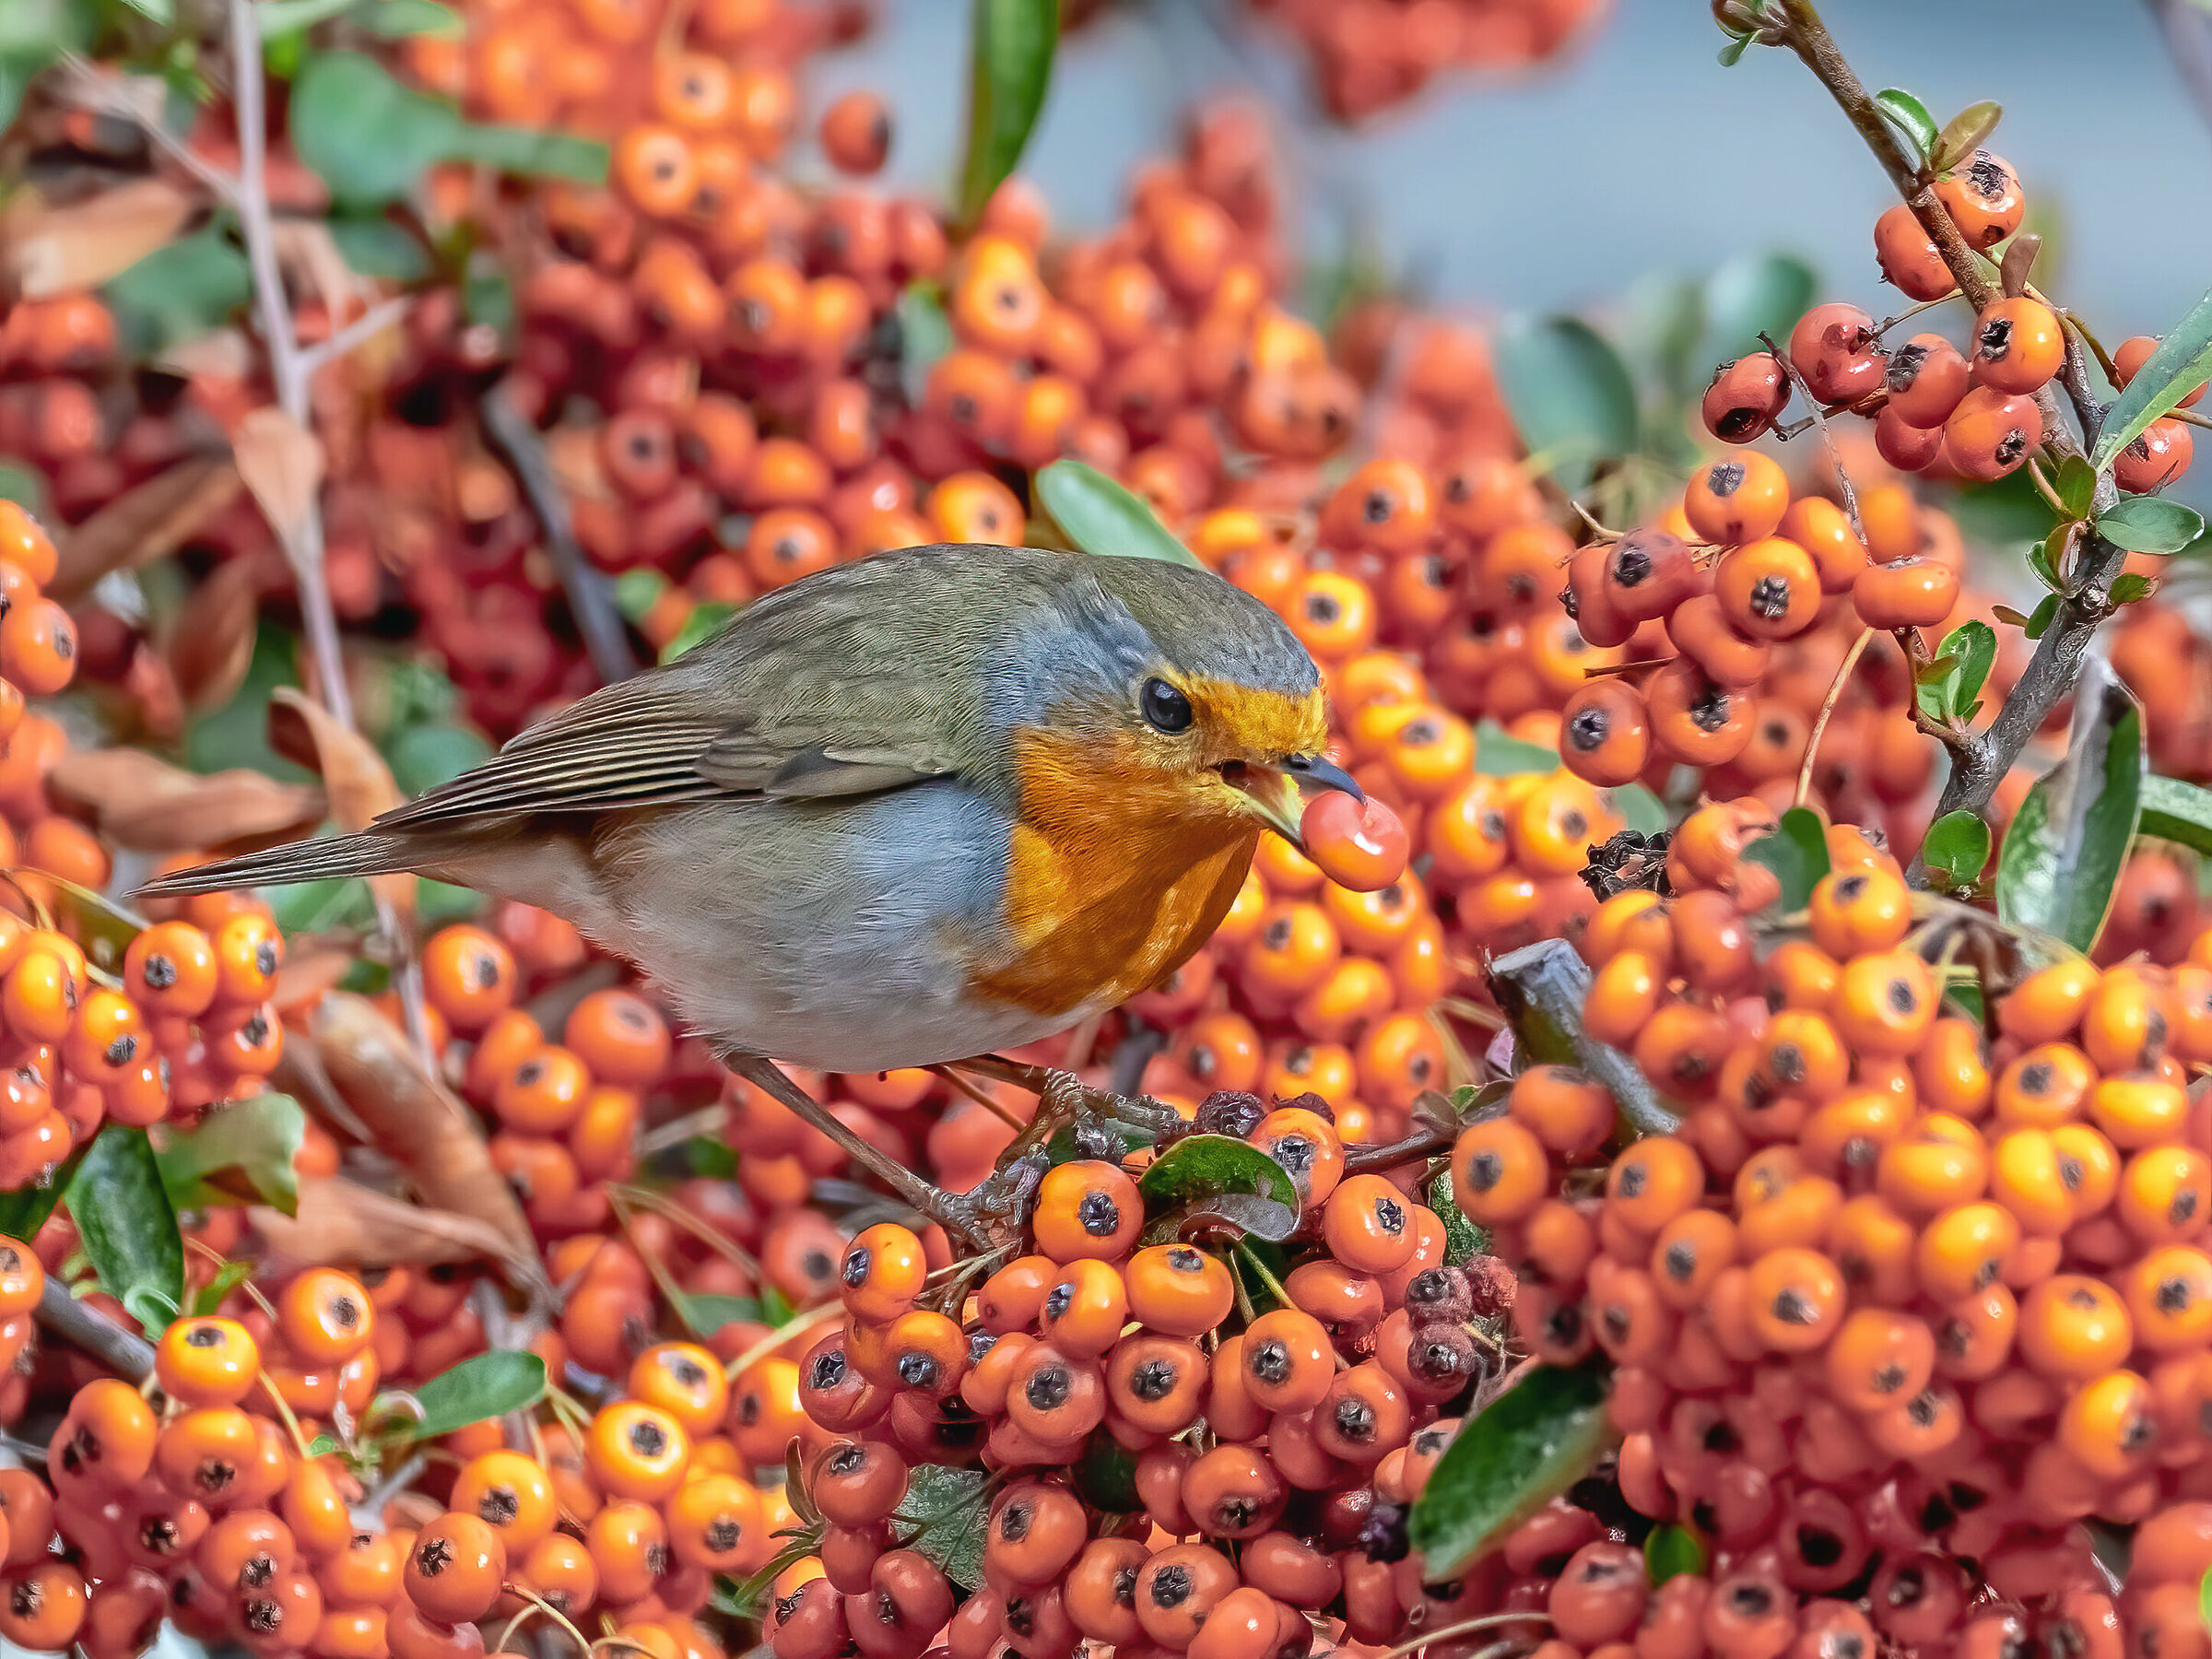 Red robin at Hawthorn berries meal...